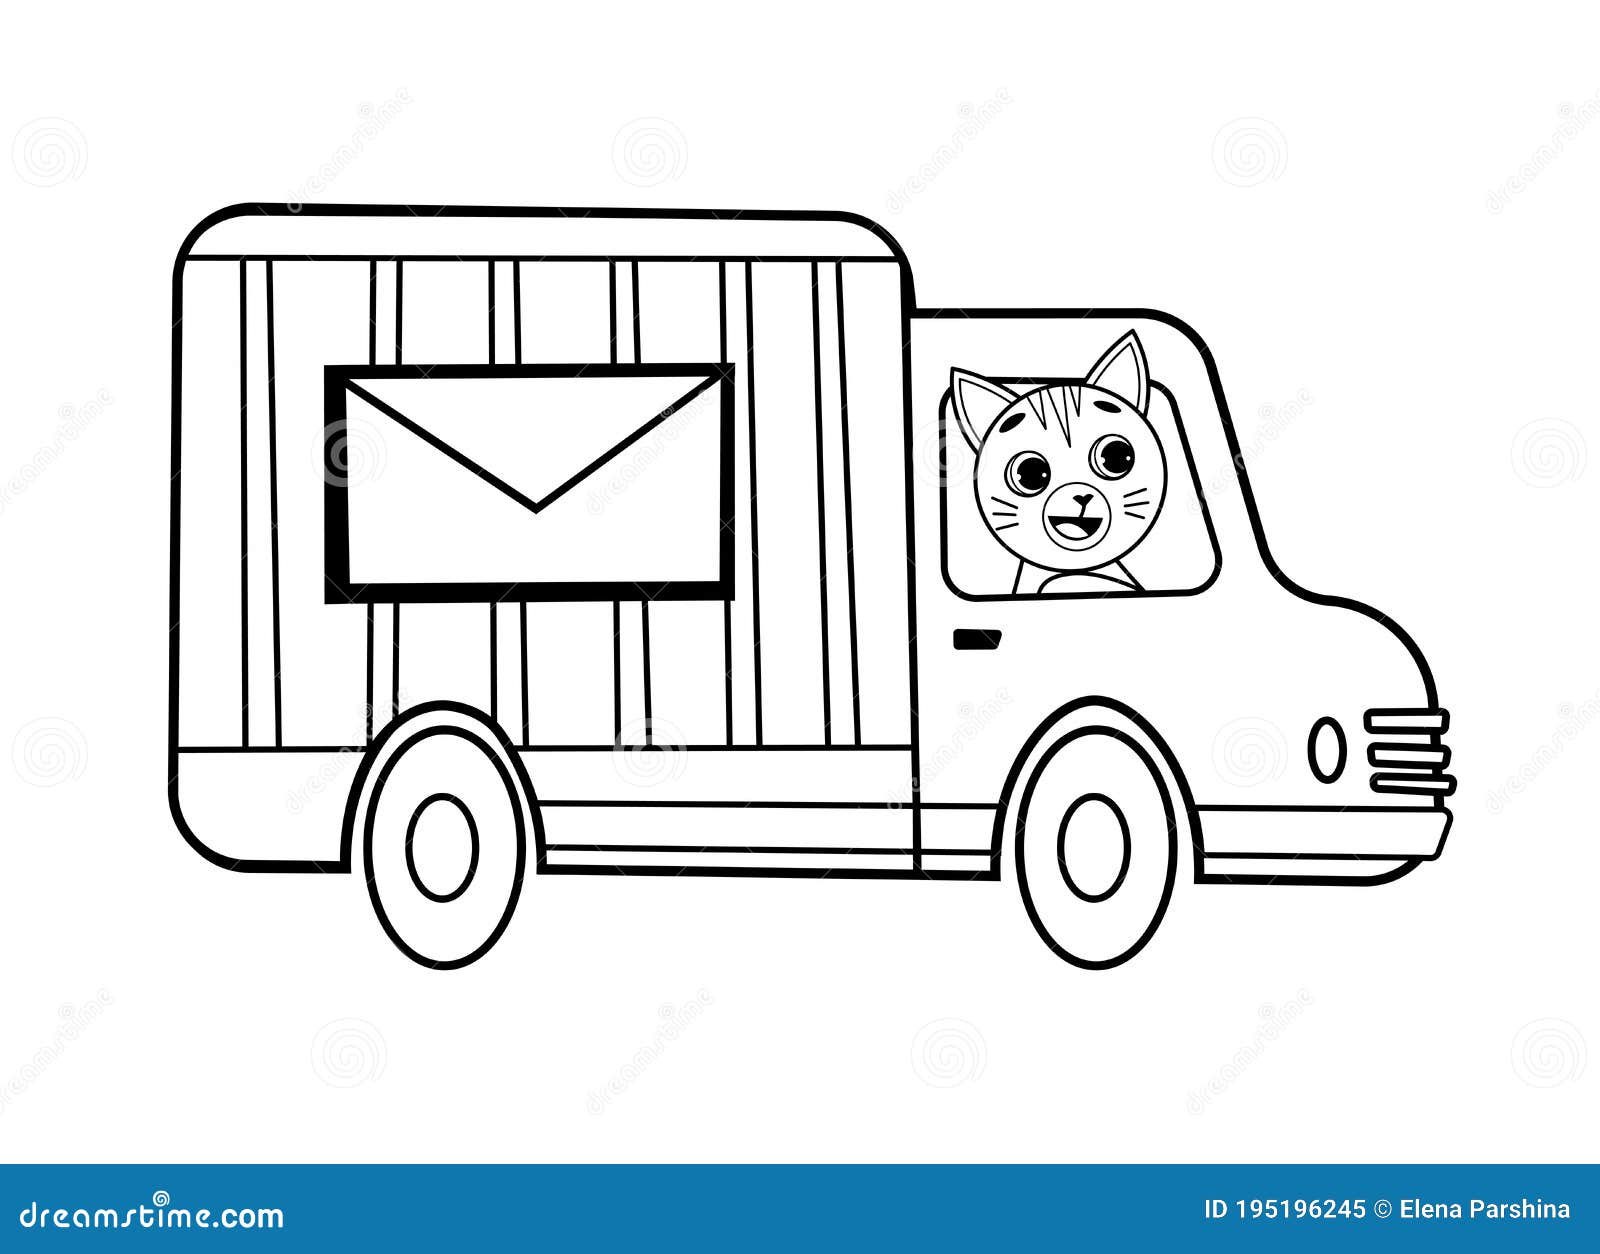 Coloring page outline of cartoon mail truck with animal vector image on white background stock vector